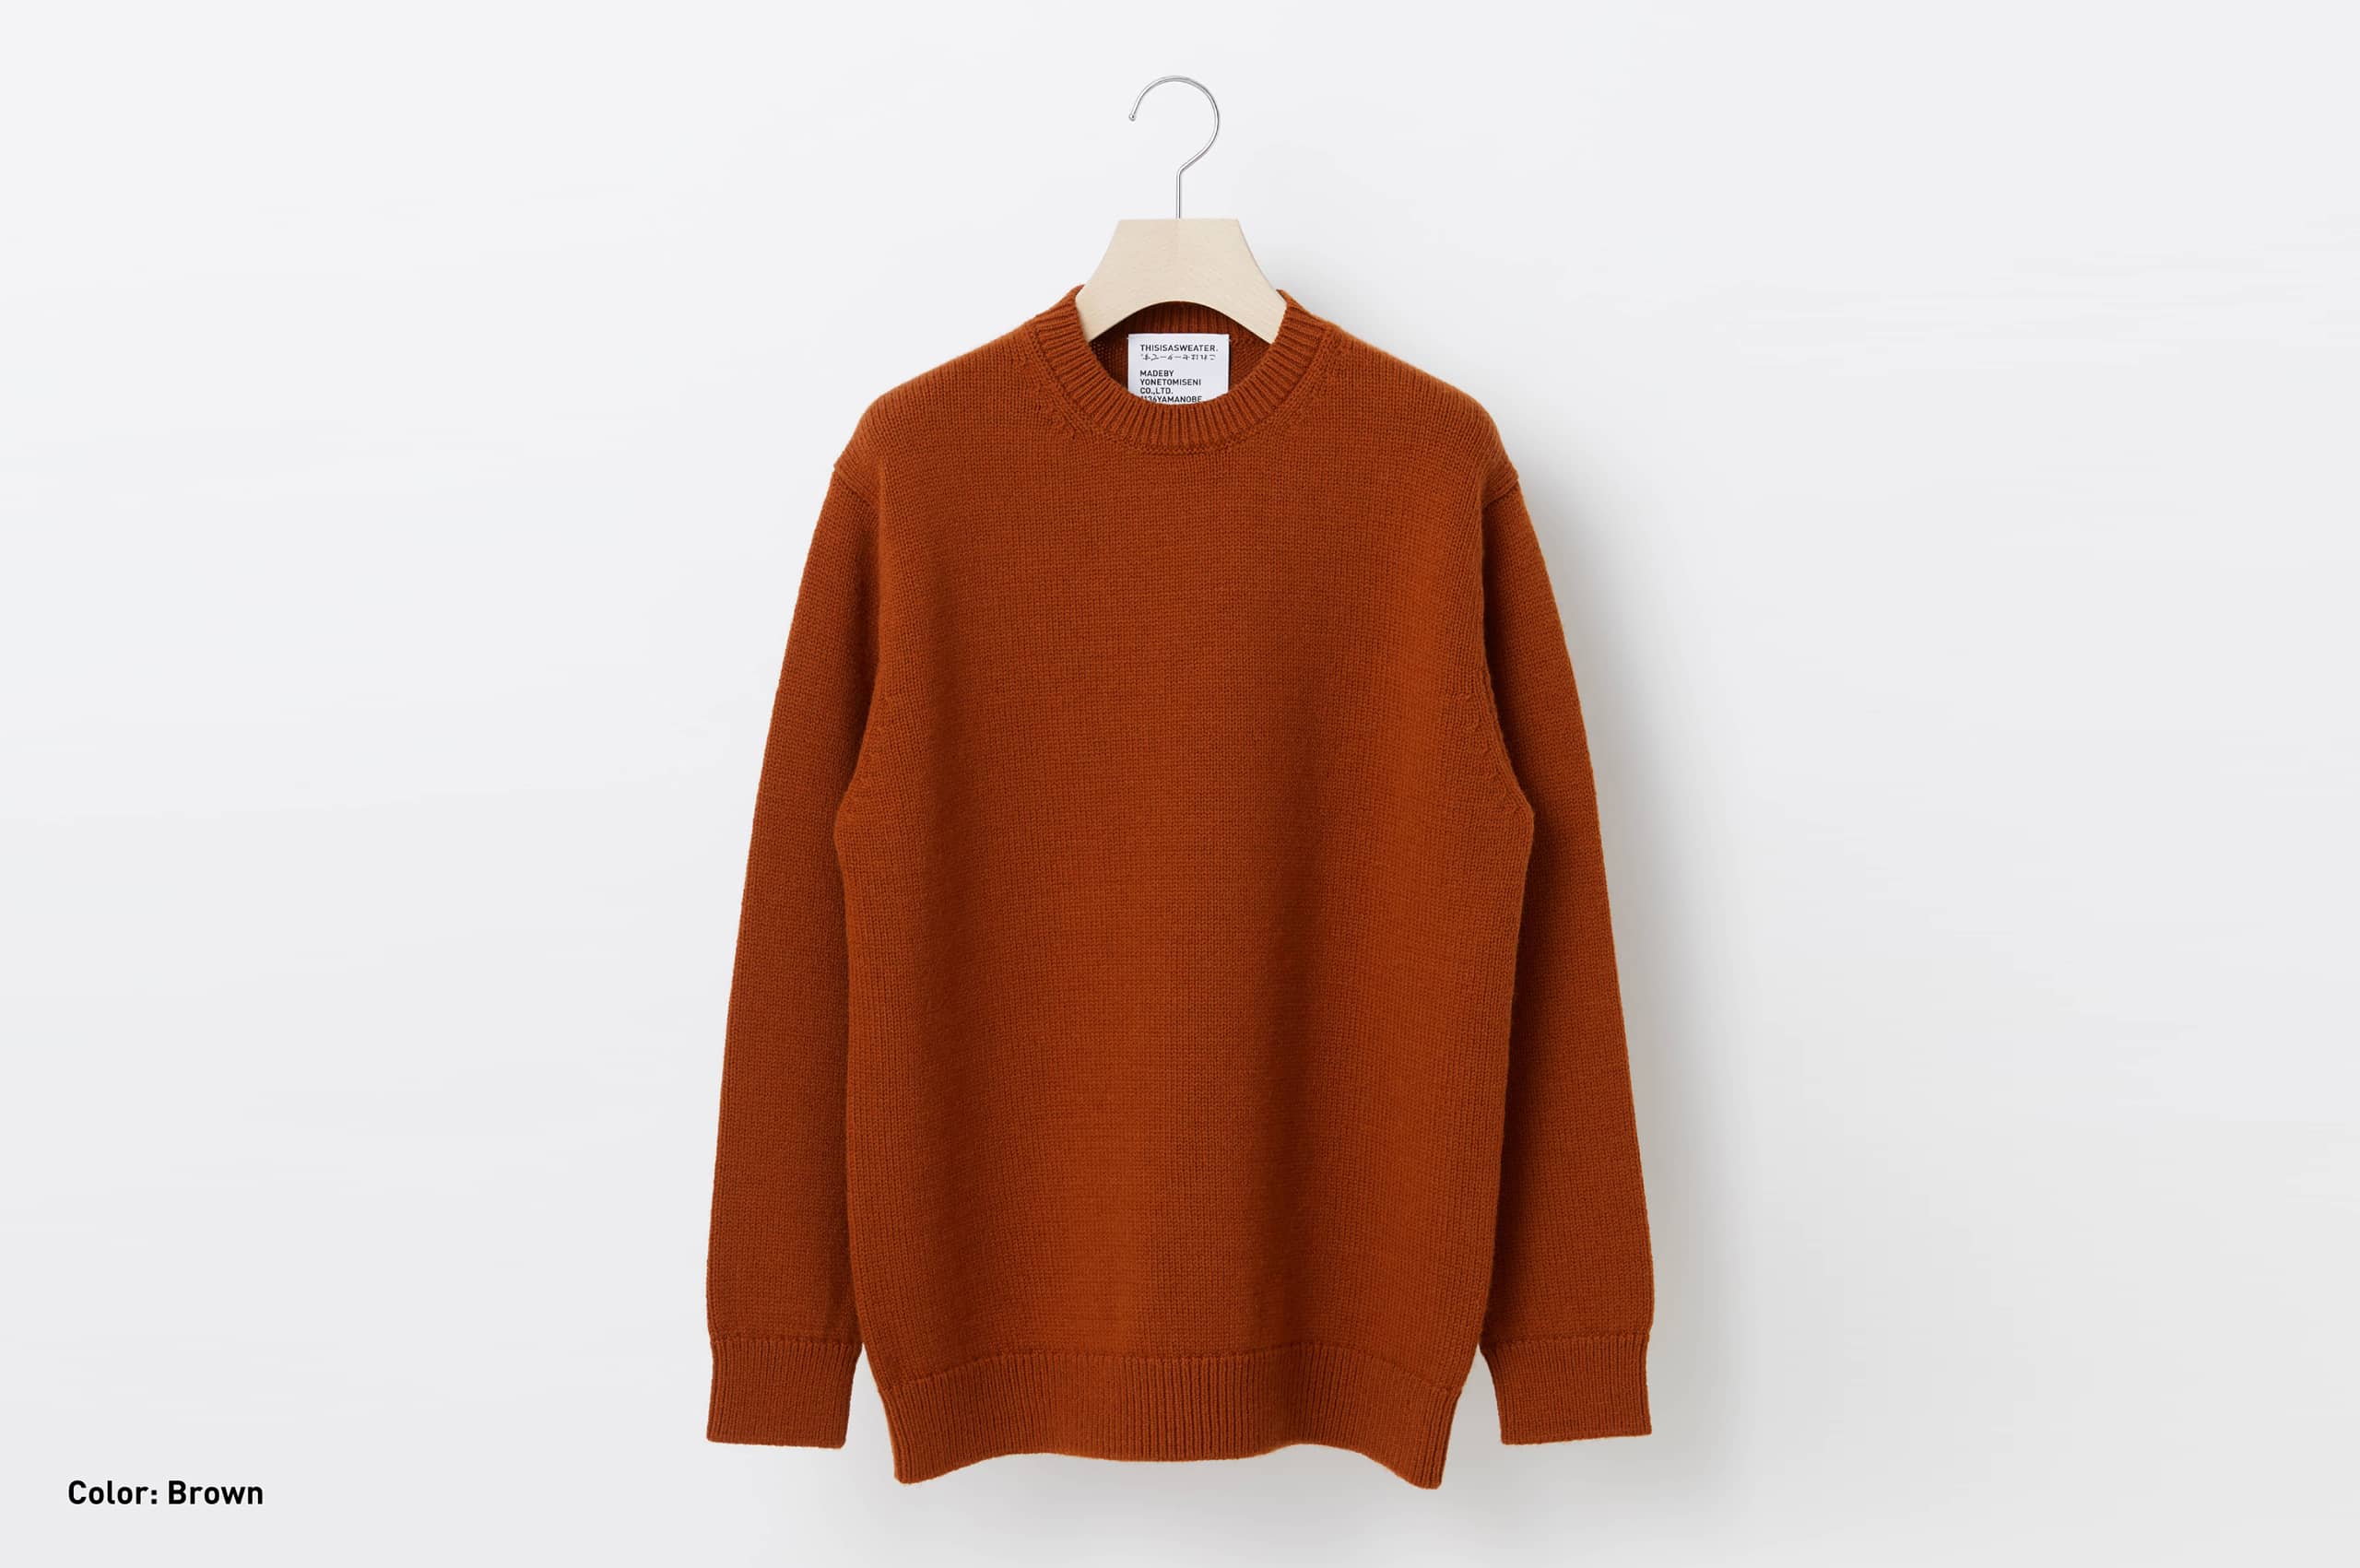 THIS IS A SWEATER.